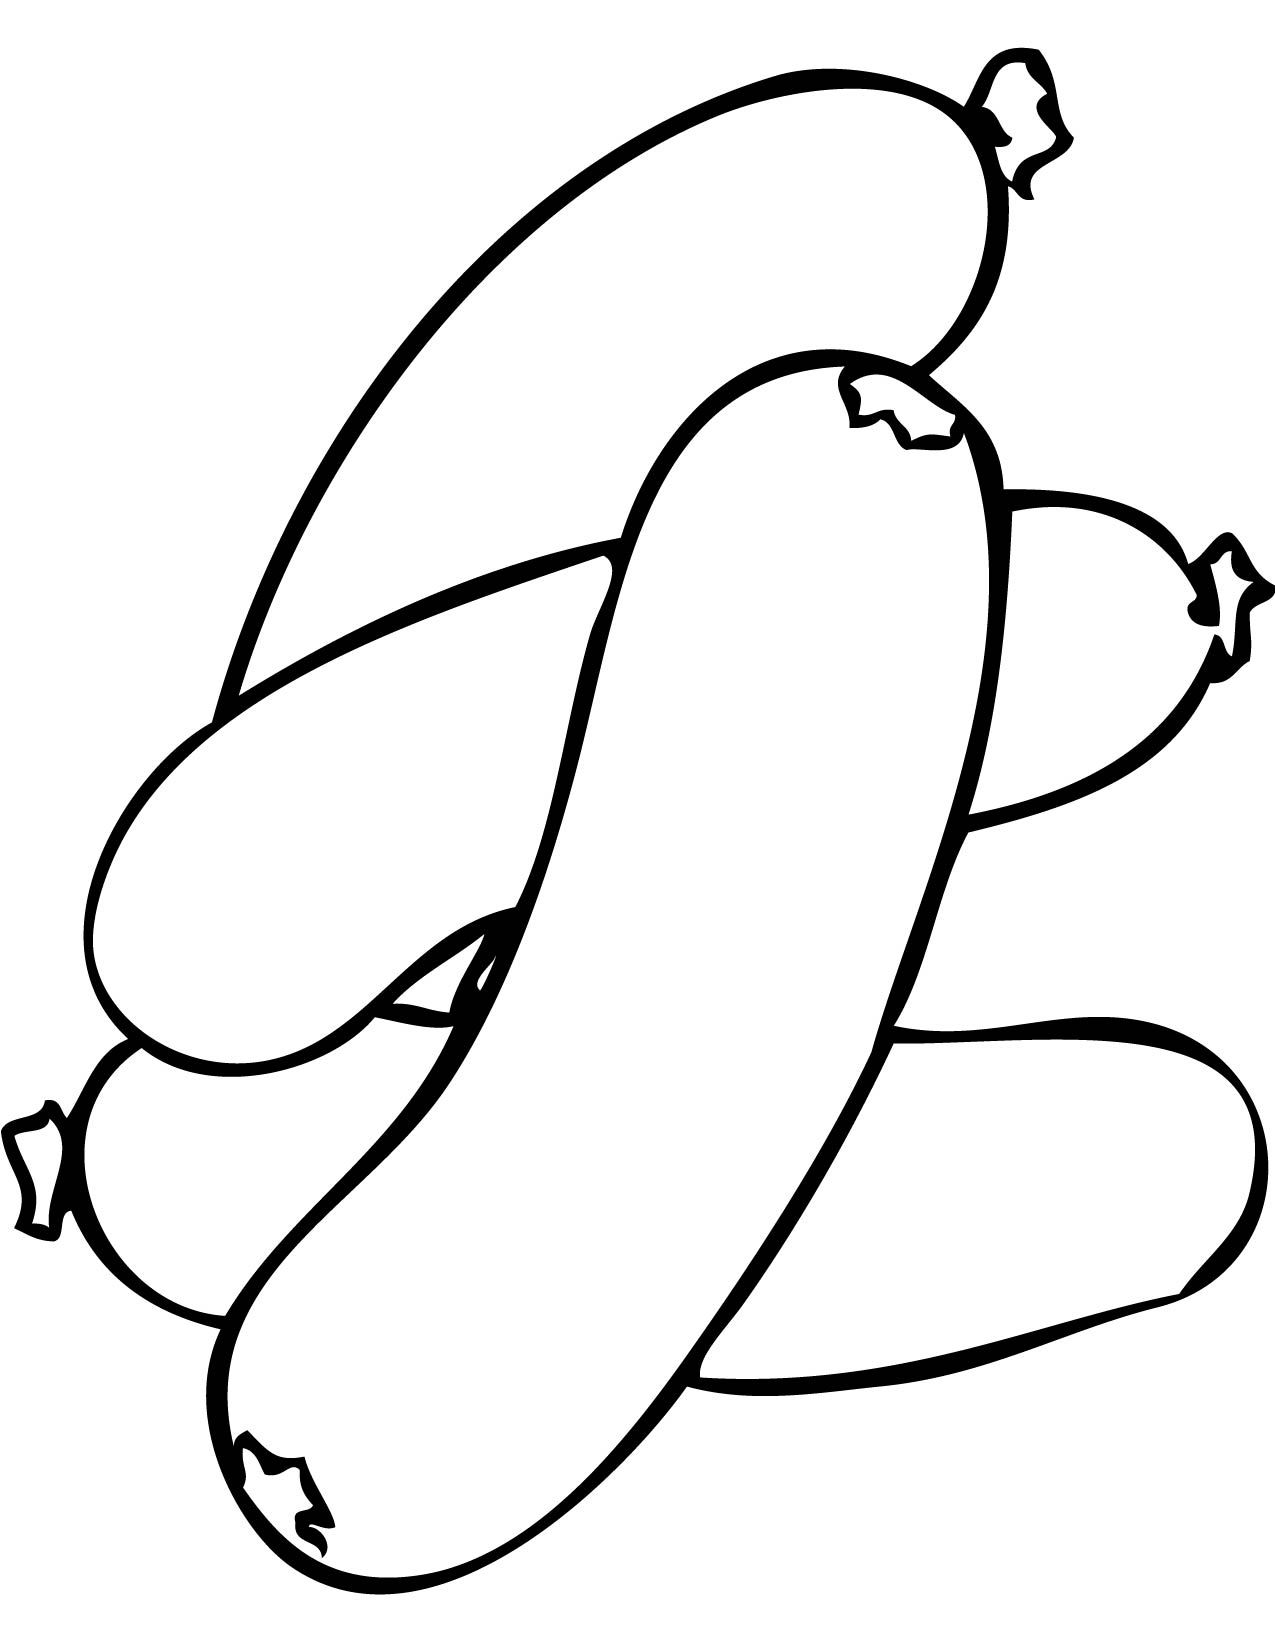 Sausage | Coloring book pages, Coloring pages, Coloring books